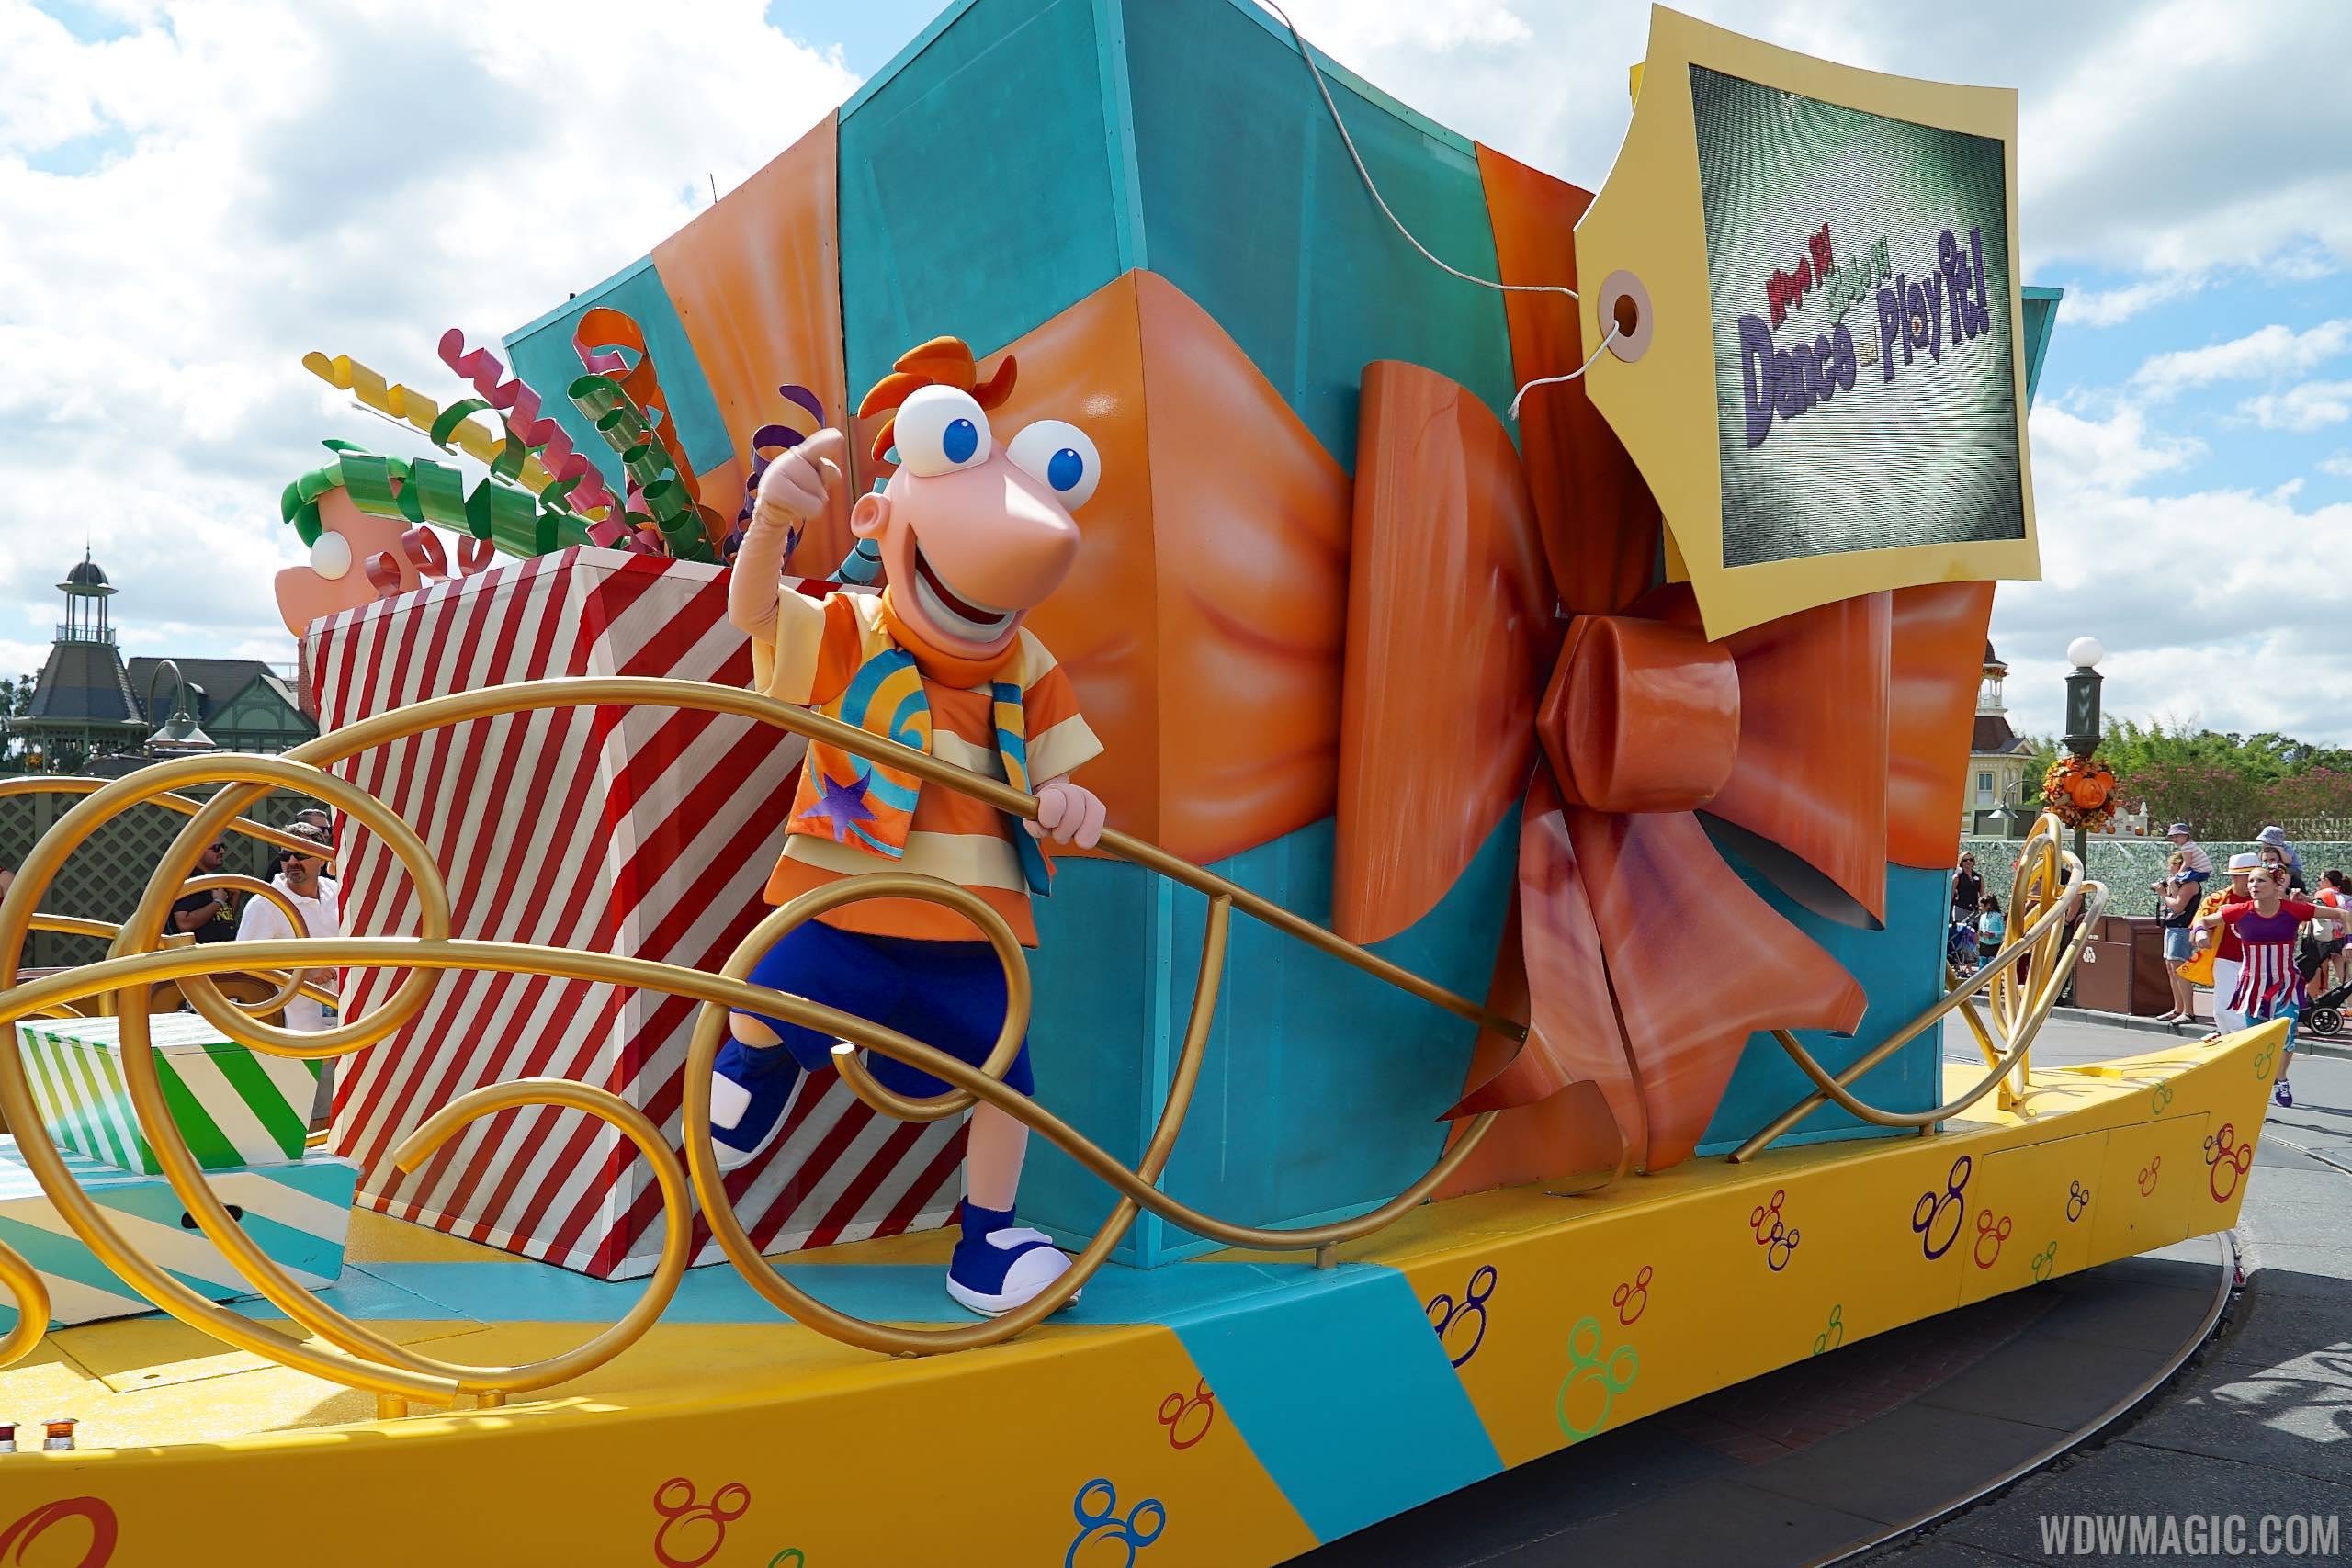 VIDEO - New 'Move It! Shake It! Dance and Play It!' Street Party opens at the Magic Kingdom